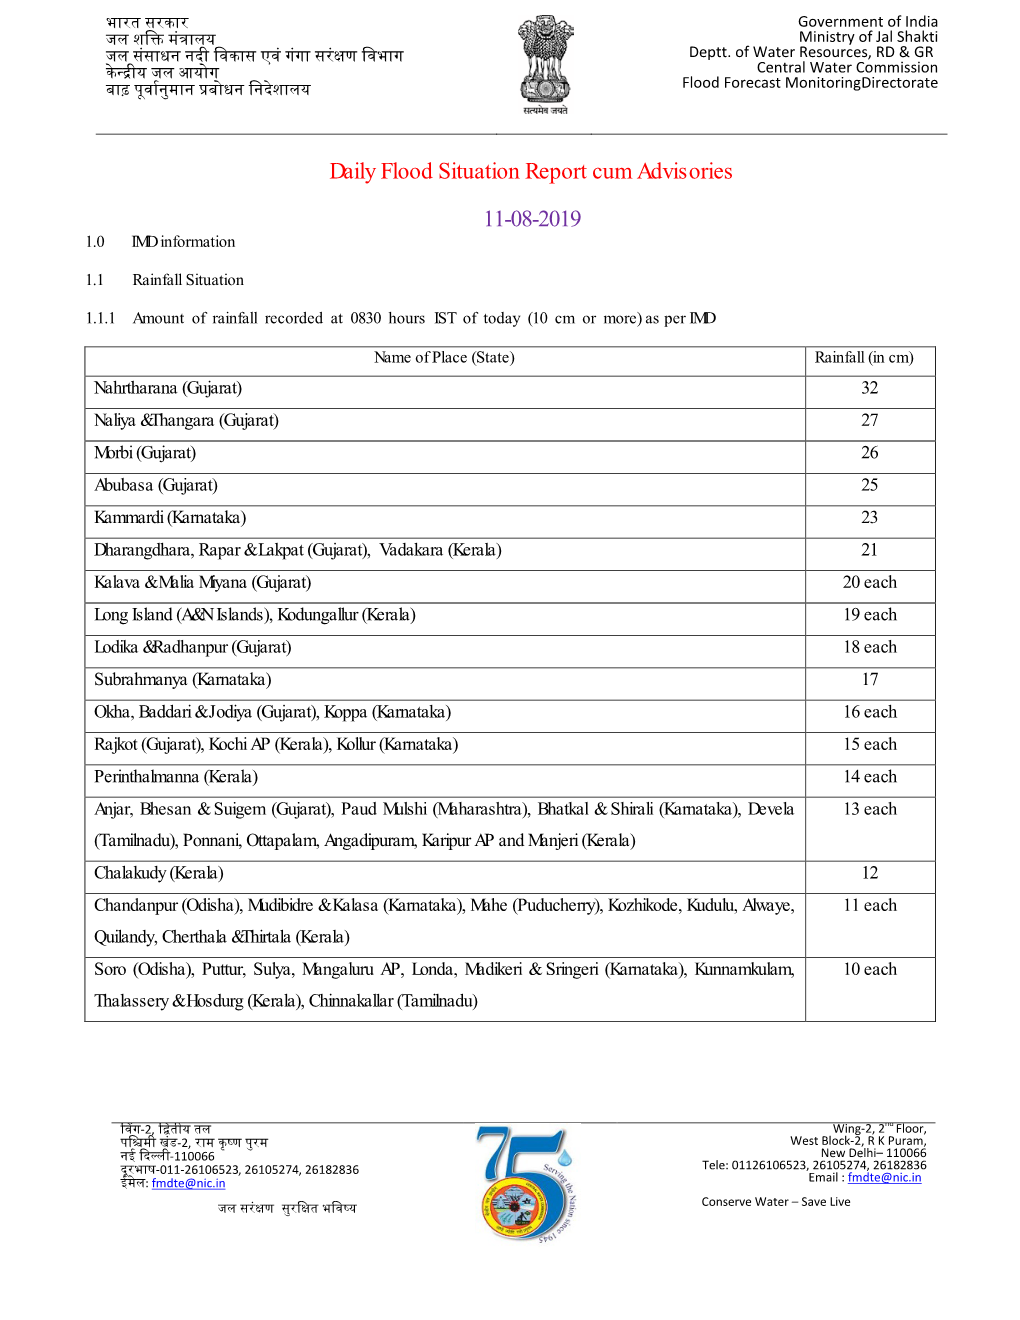 Daily Flood Situation Report Cum Advisories 11-08-2019